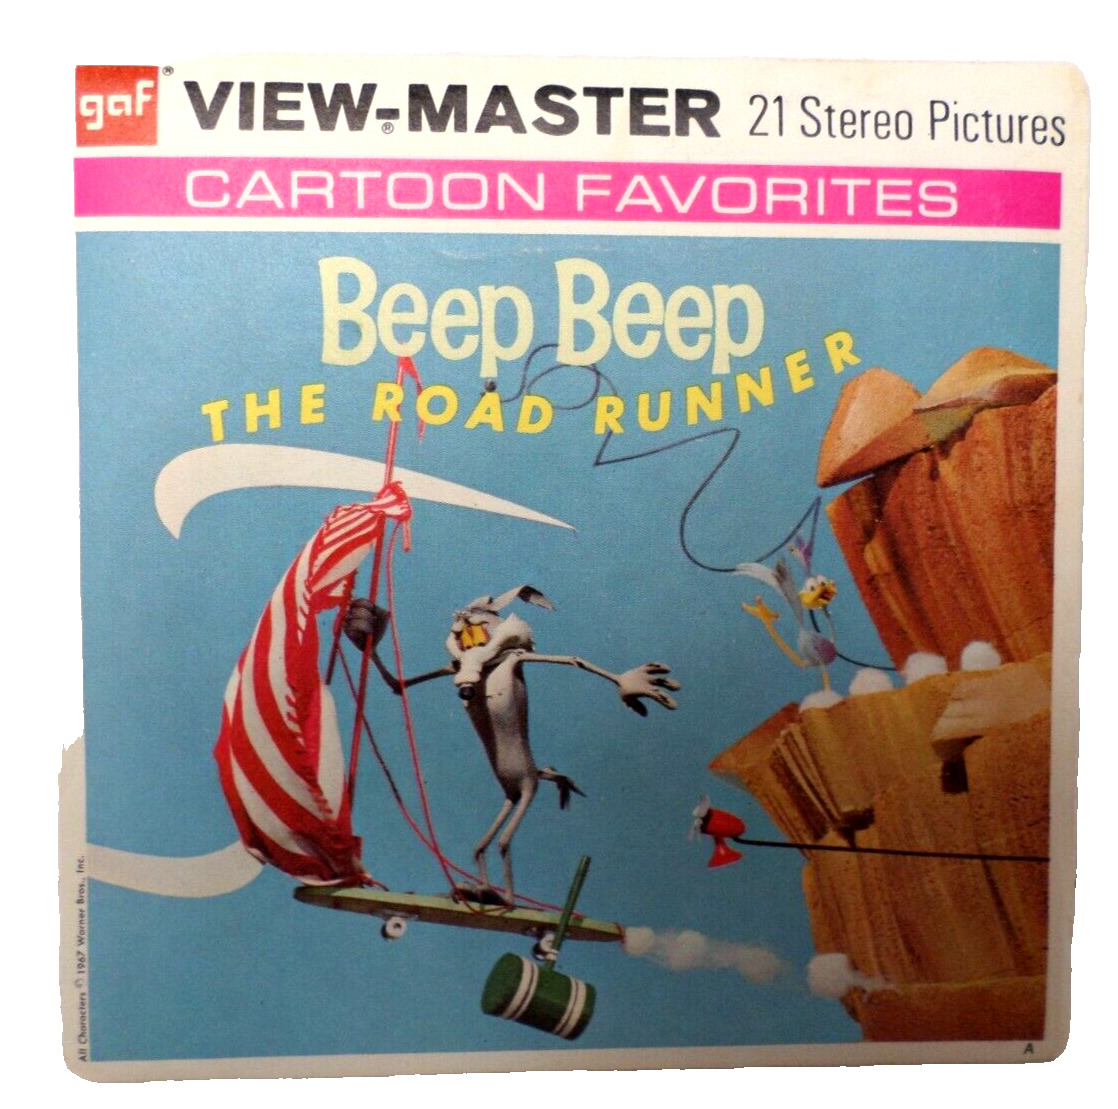 Vintage Beep Beep The Road Runner GAF View-Master Slides with Inserts 1967